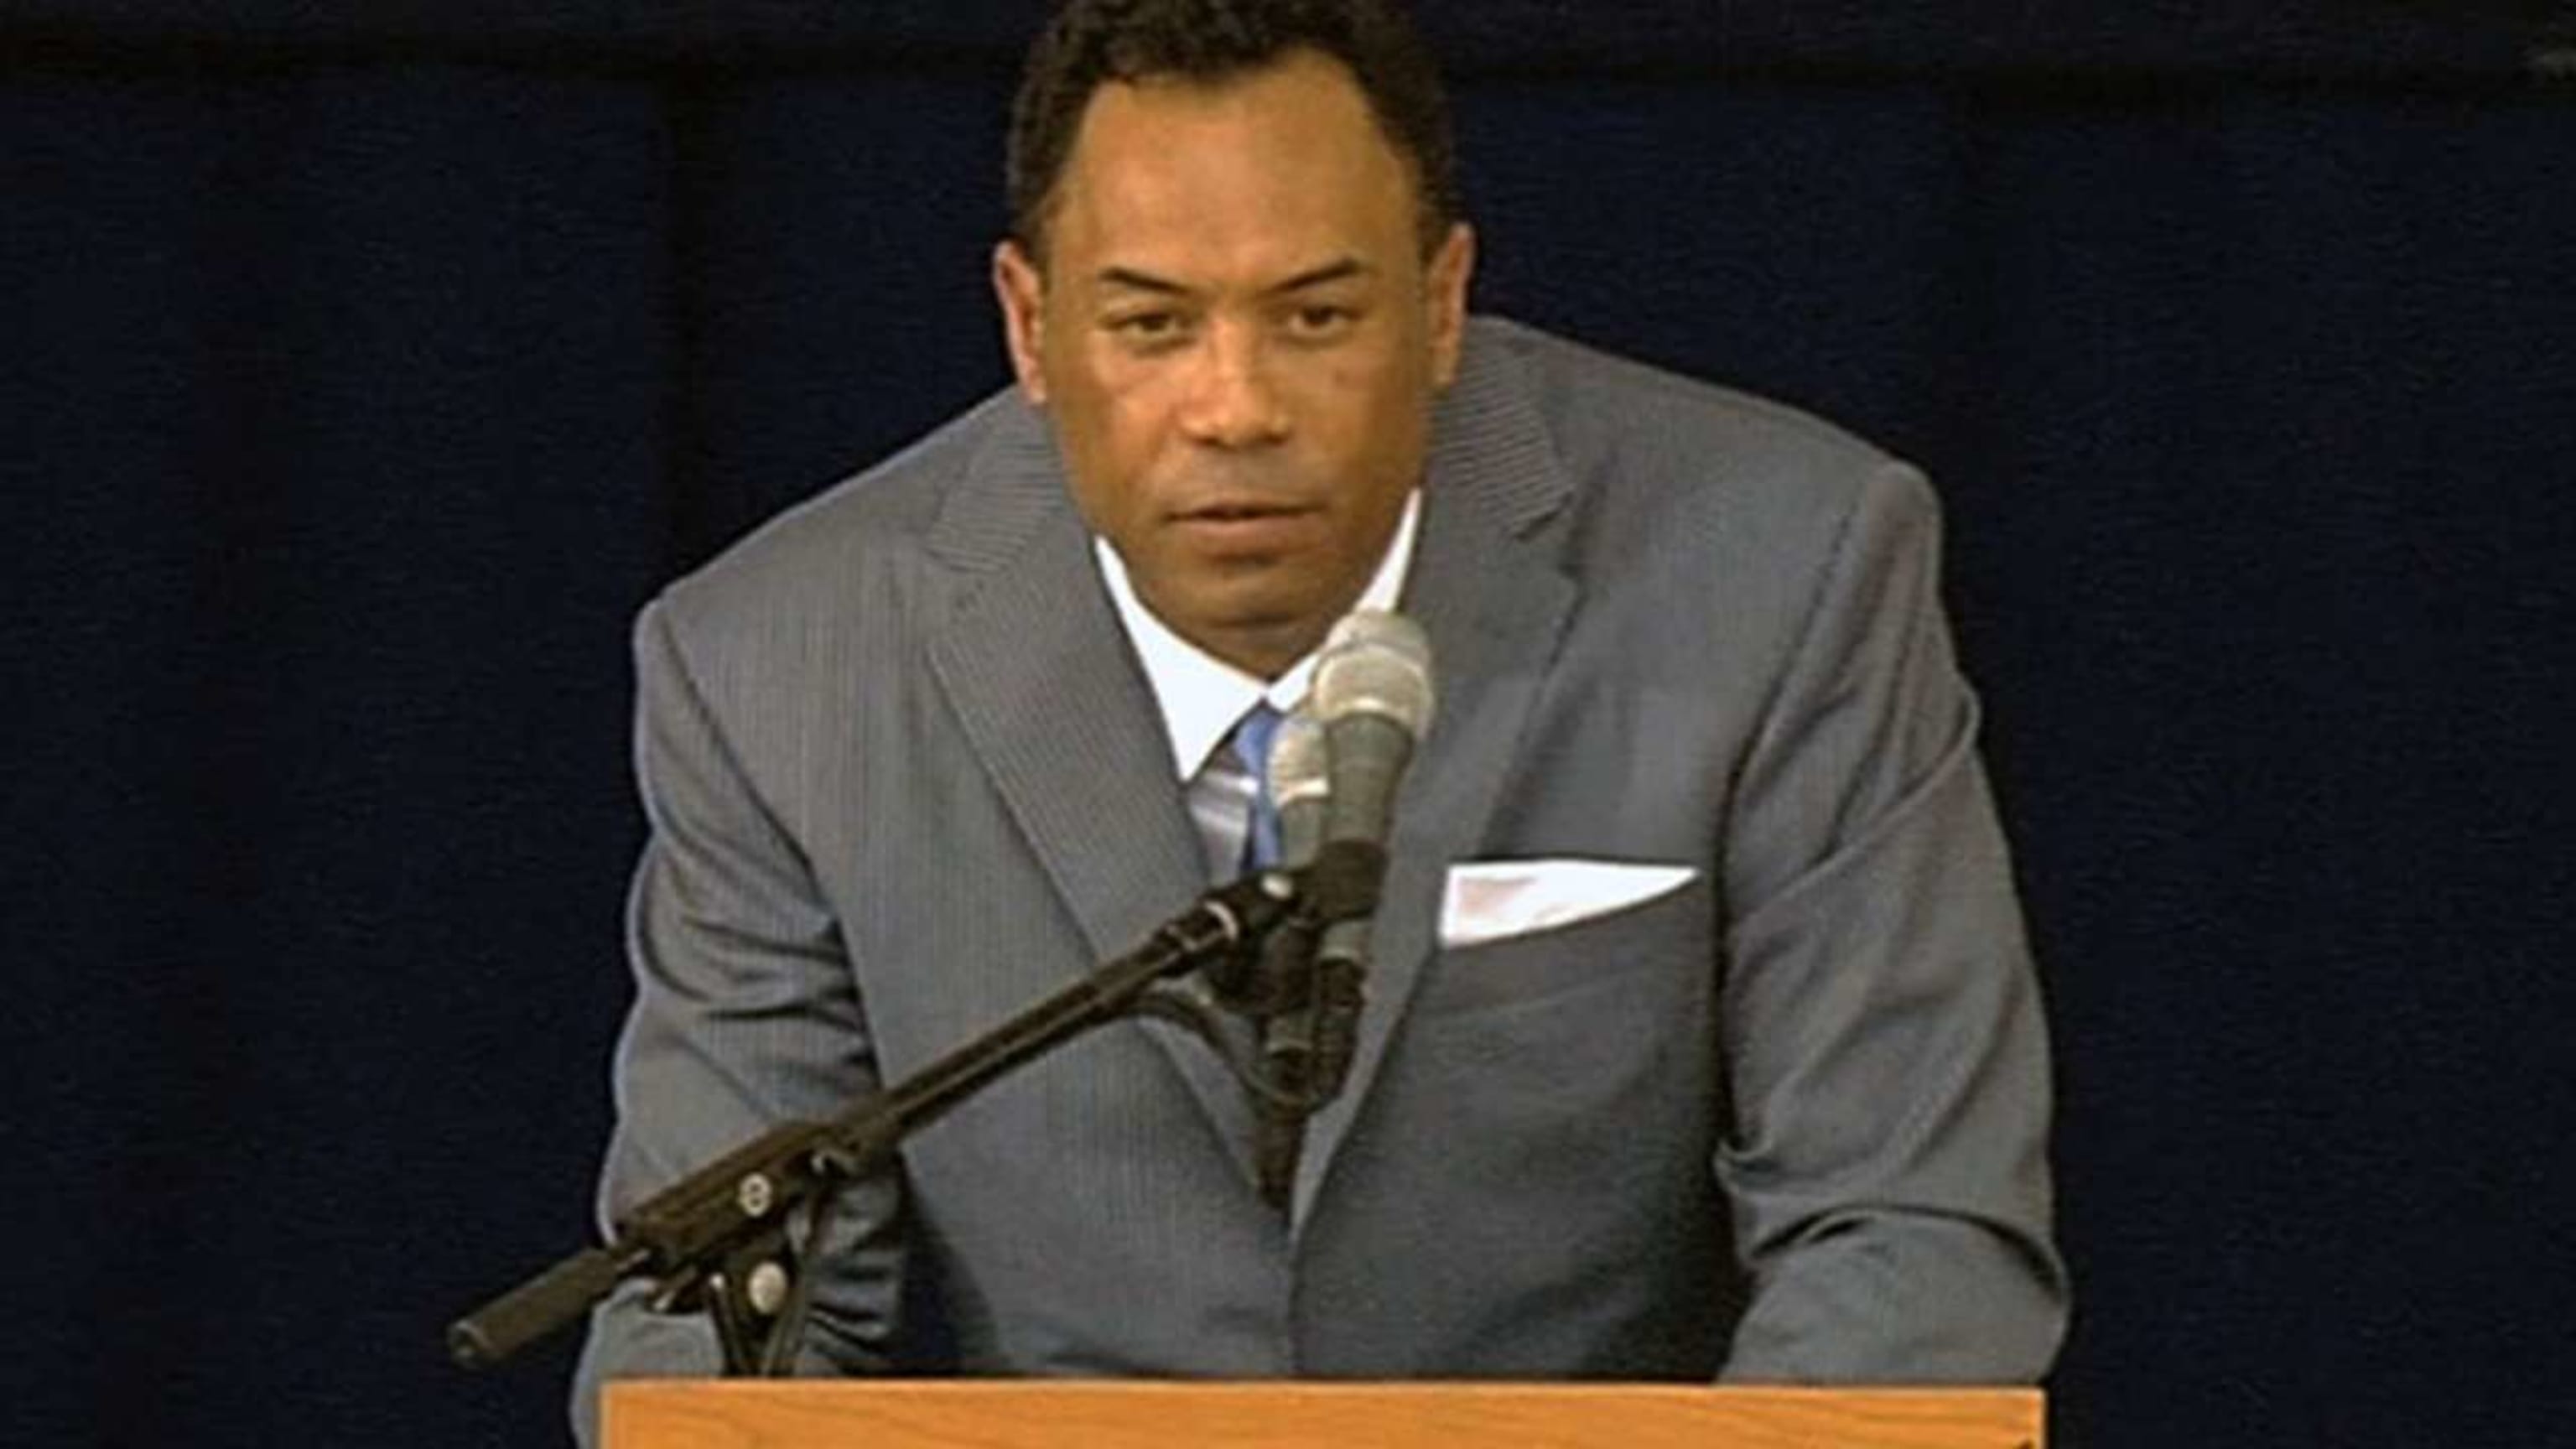 Alomar enters the Hall of Fame